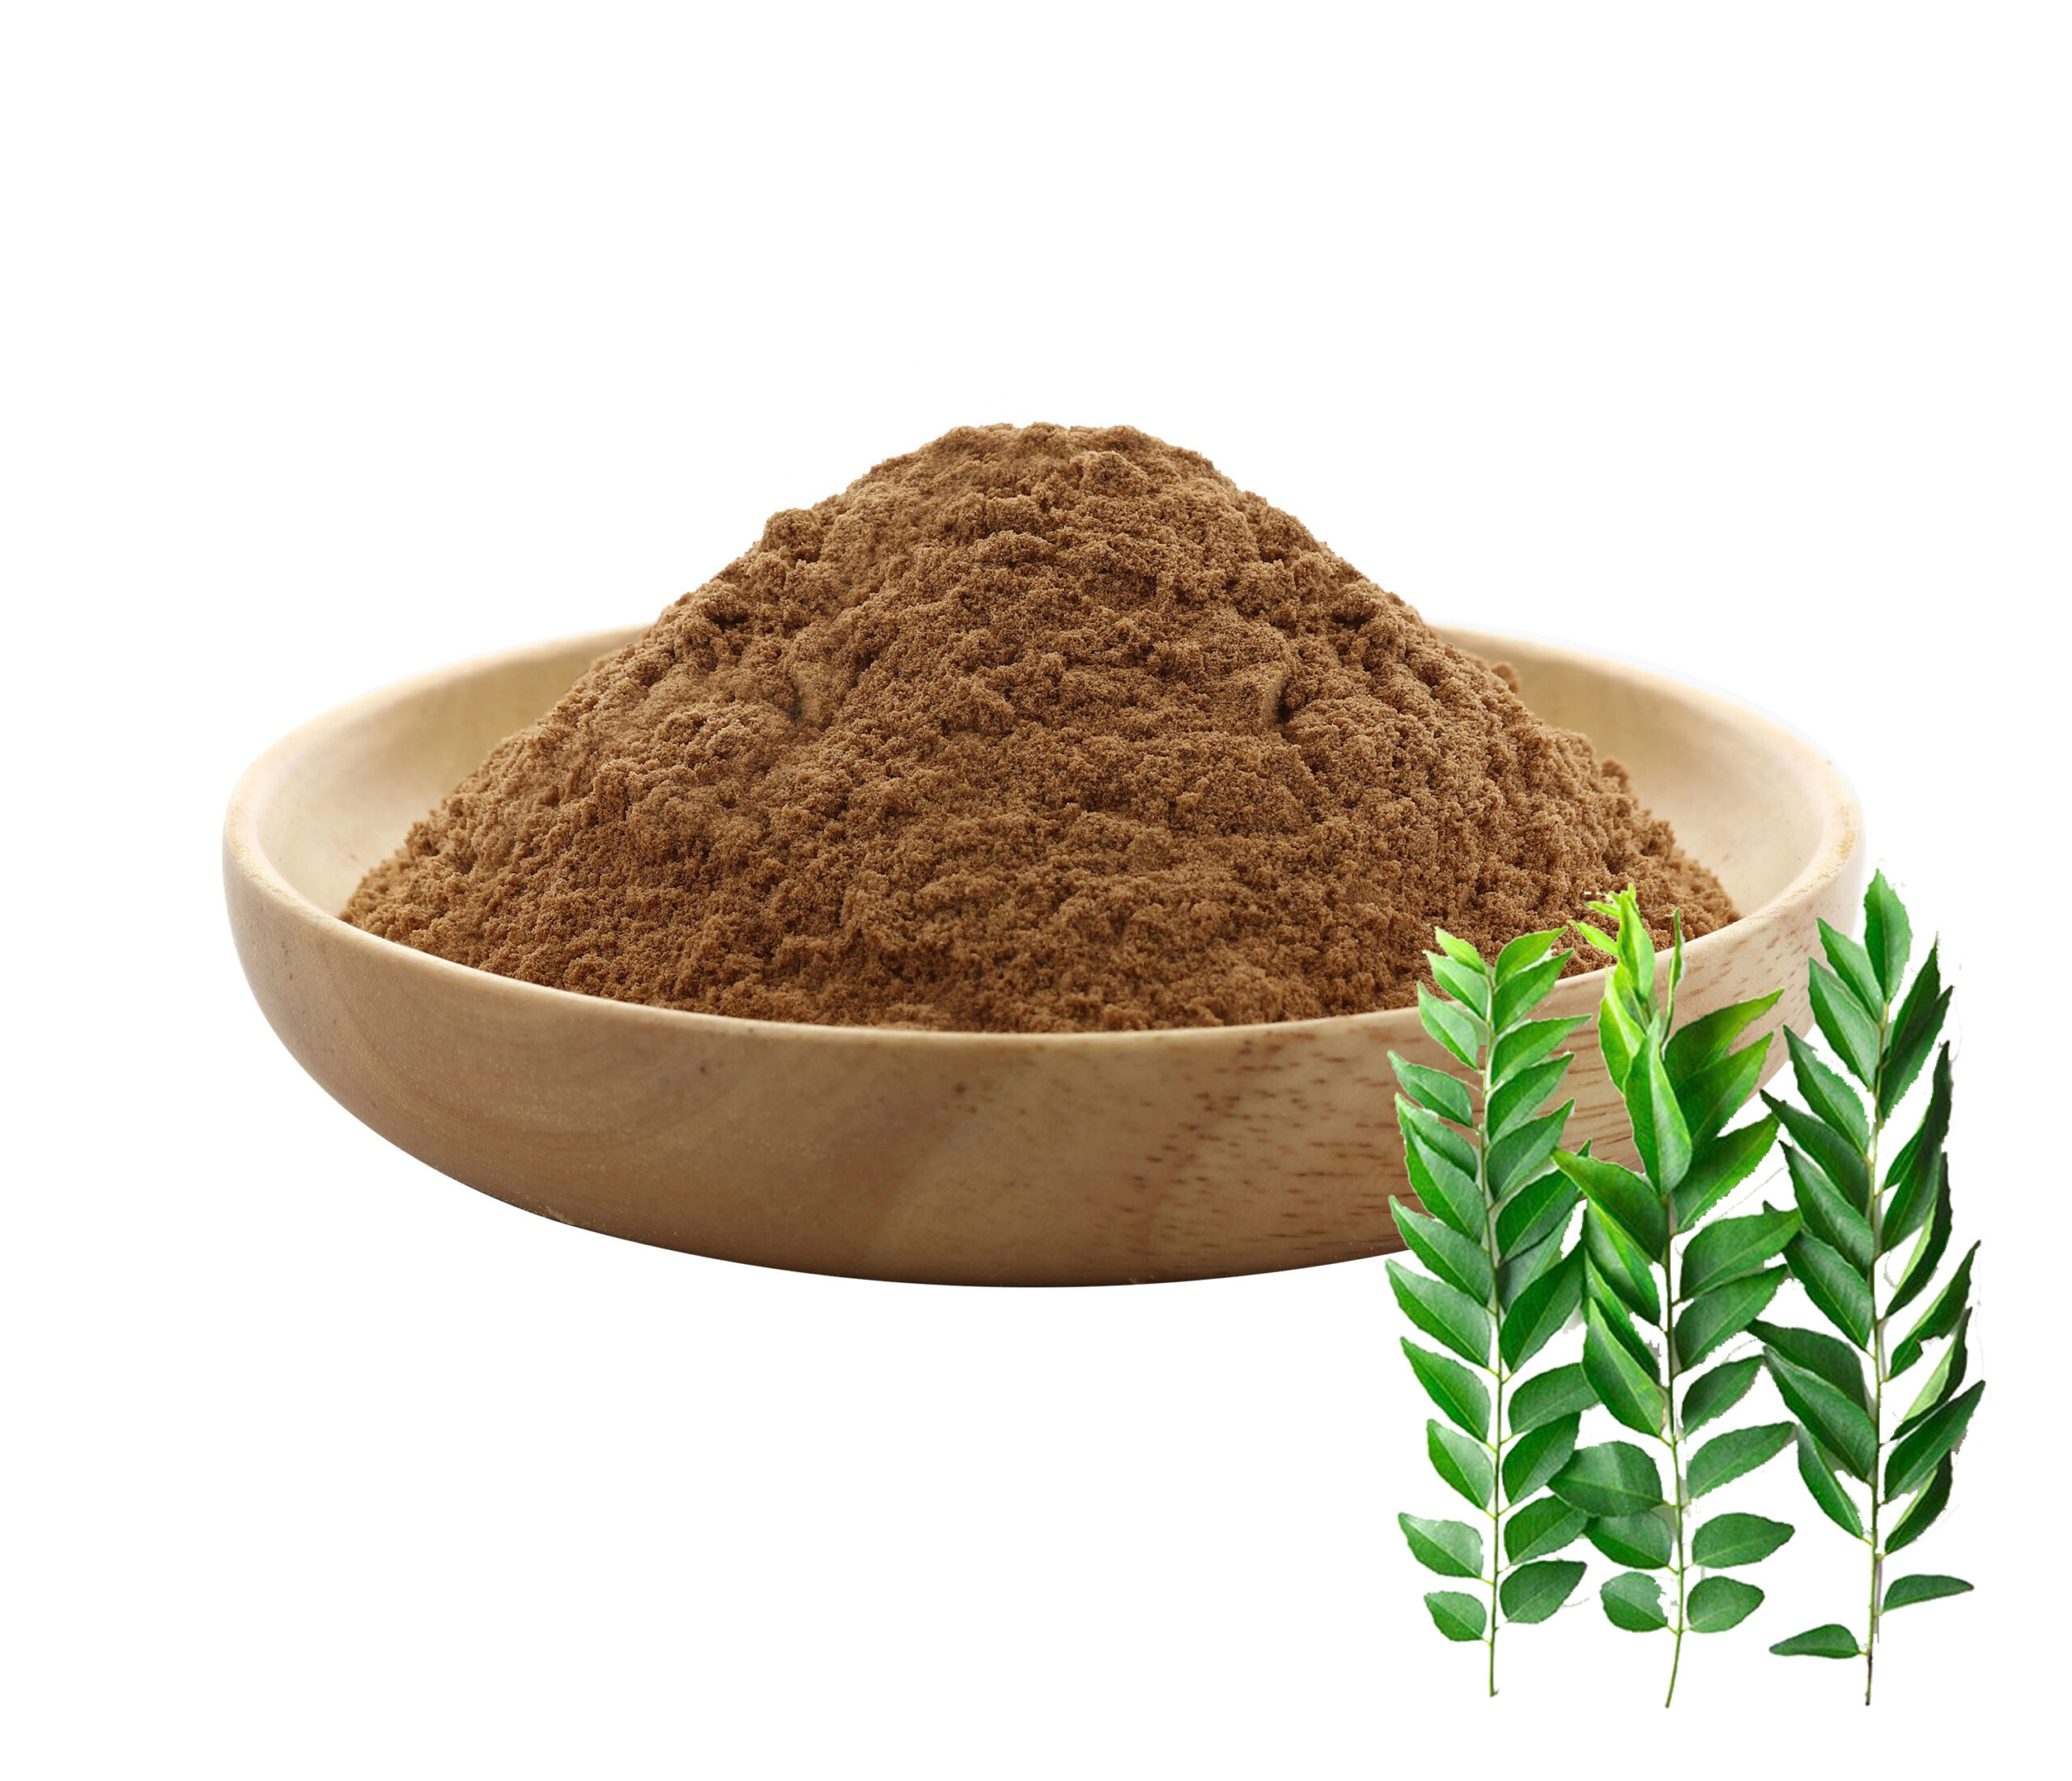 Cinnamon and curry leaves powder also reduces the risk of cancer